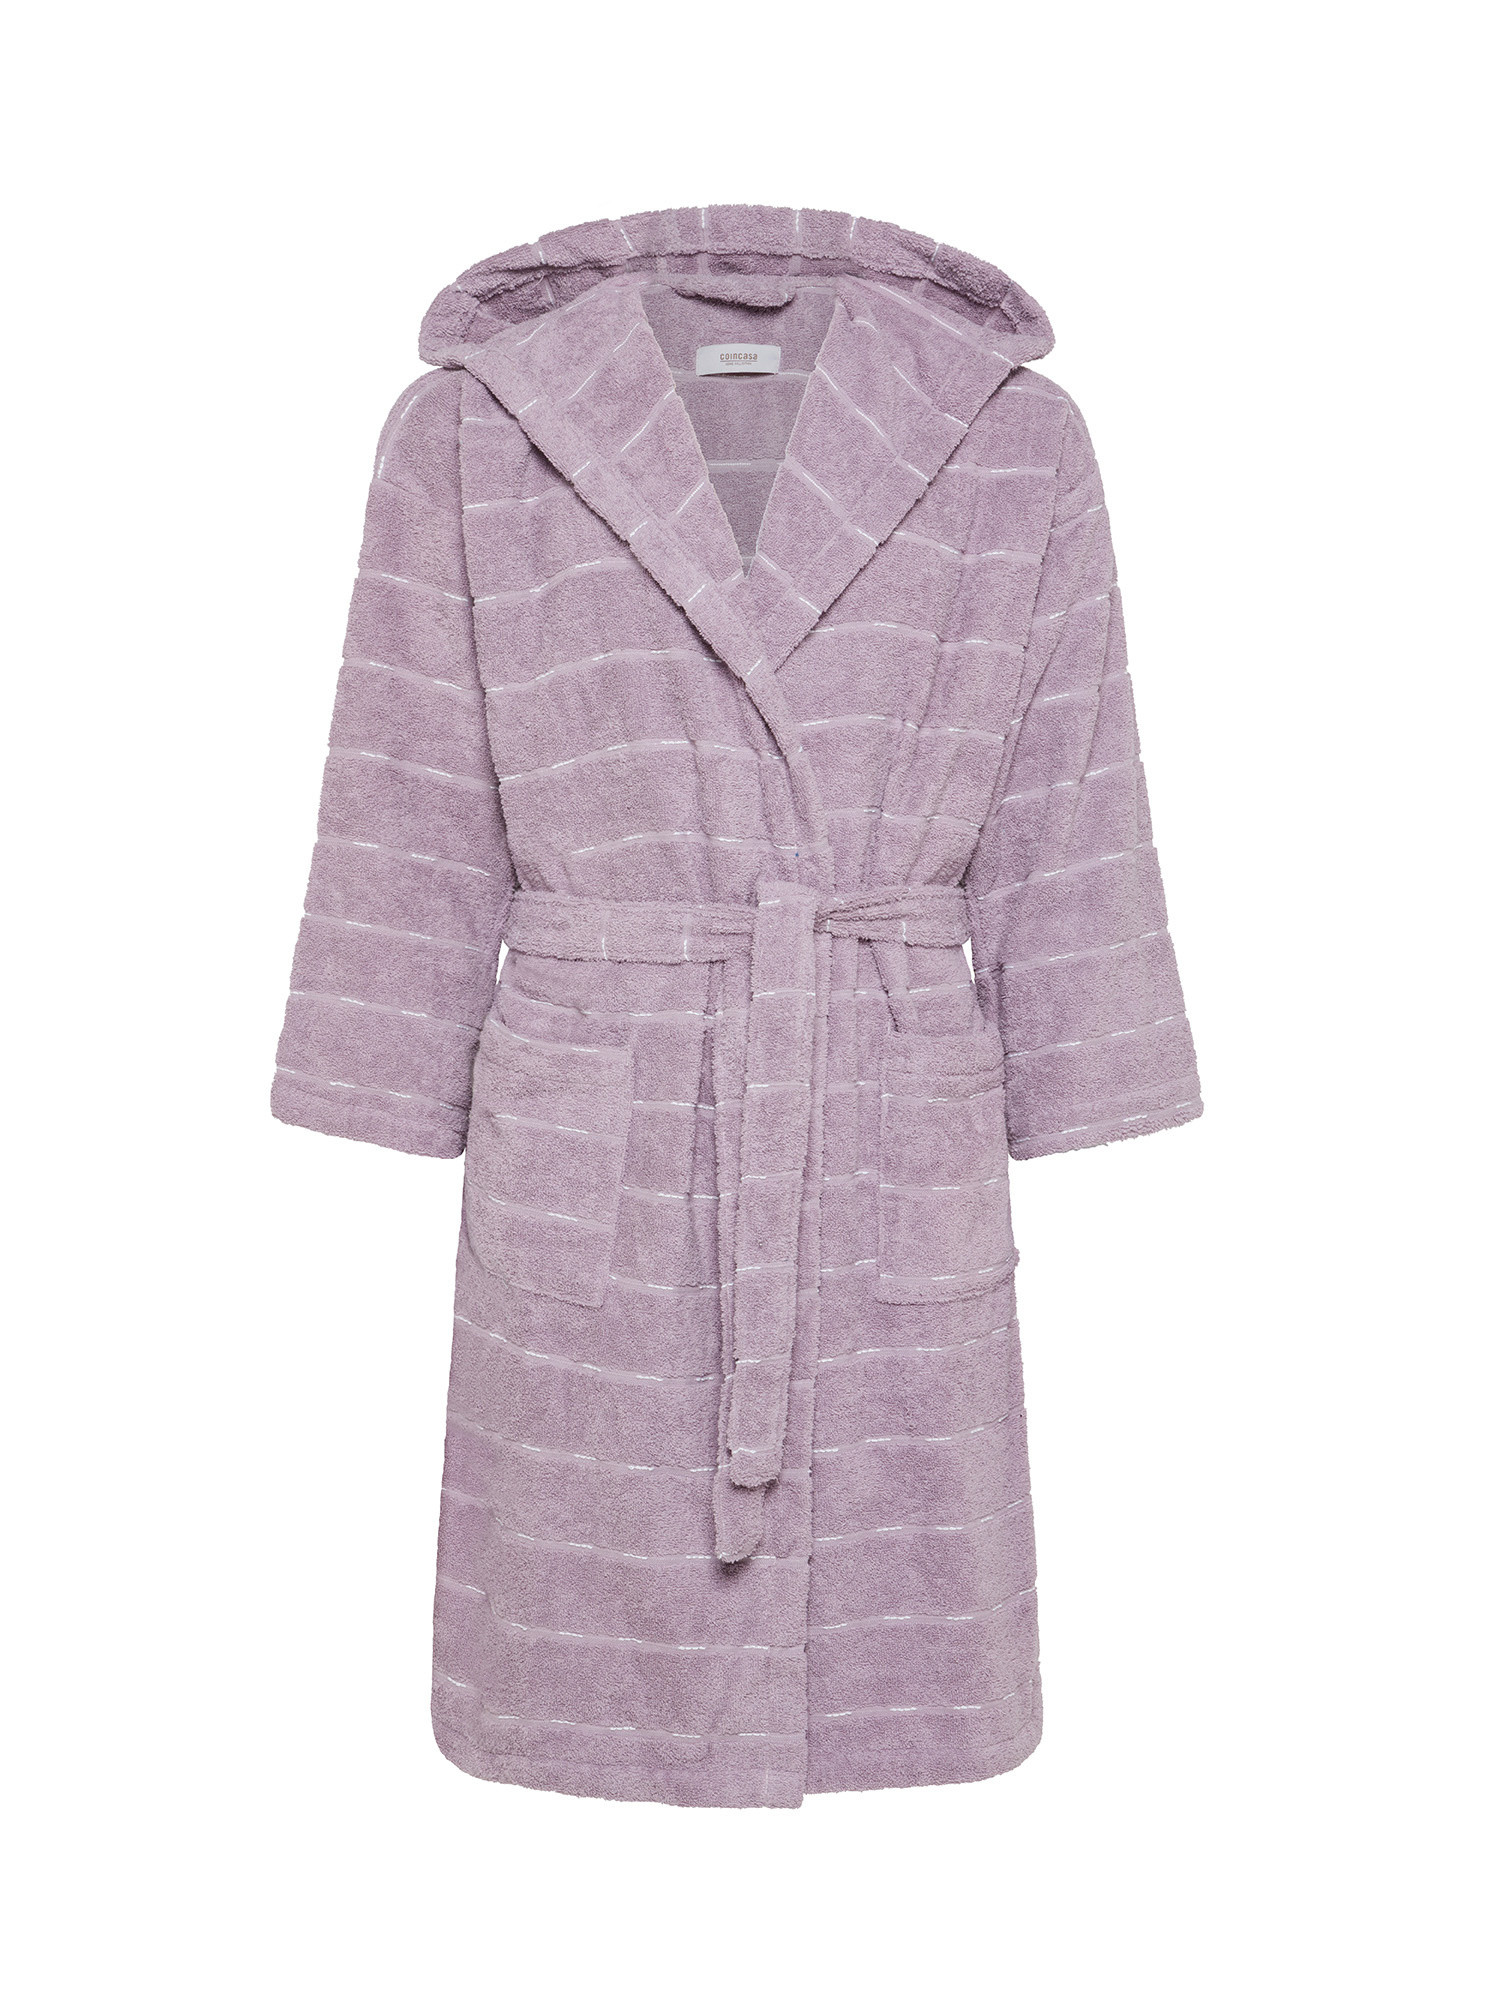 Yarn-dyed pure cotton bathrobe with stitching effect, Pink, large image number 0